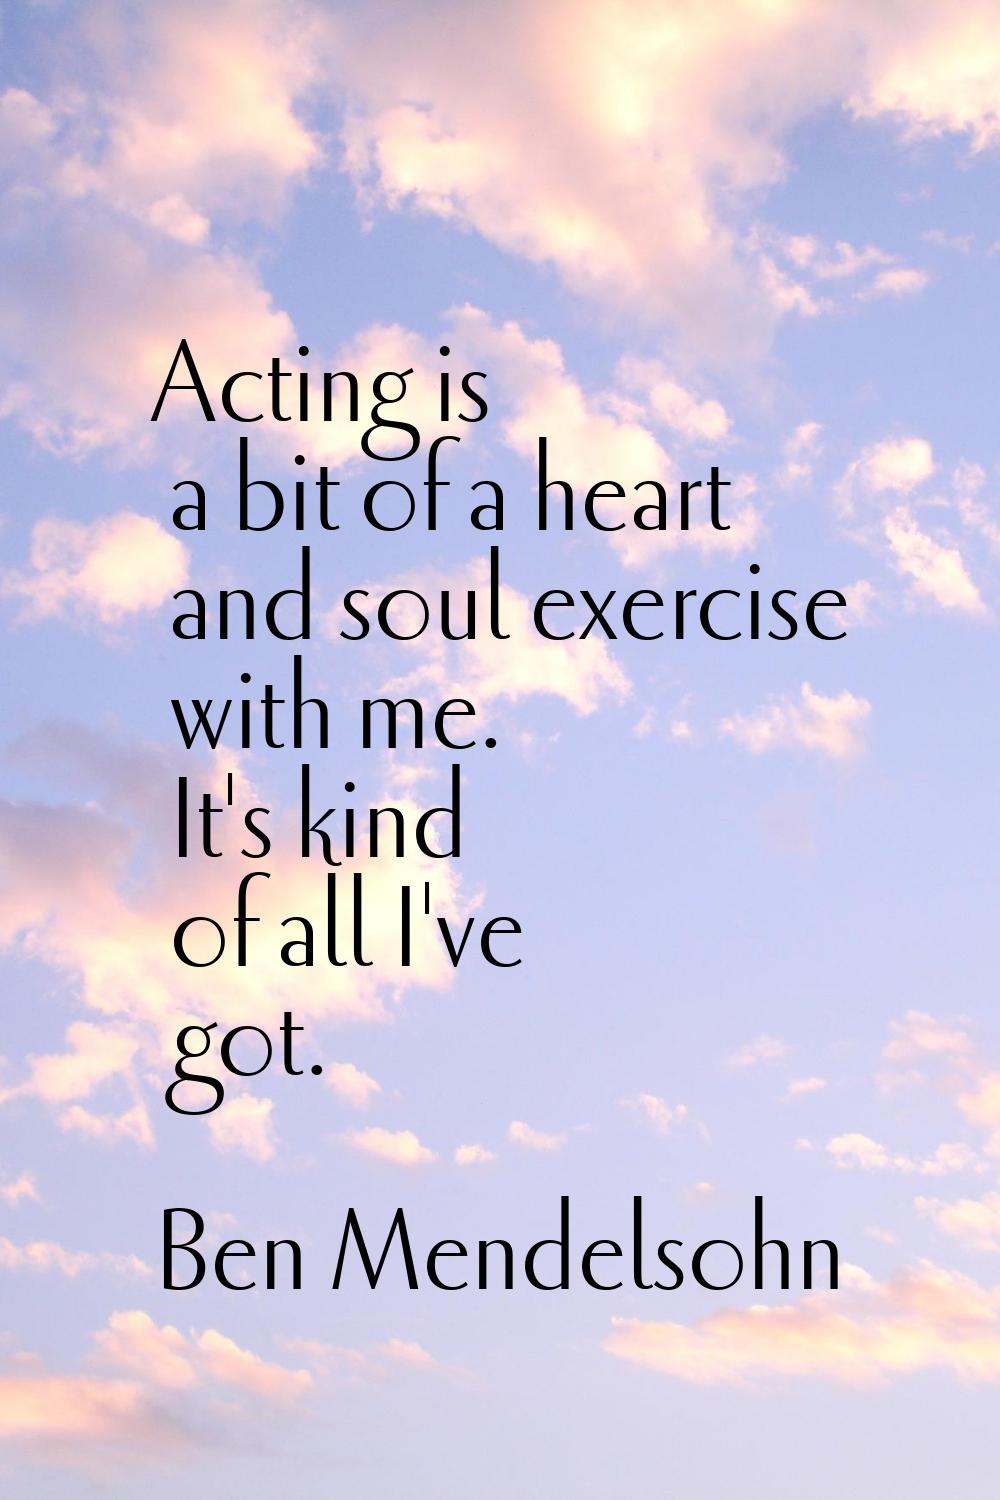 Acting is a bit of a heart and soul exercise with me. It's kind of all I've got.